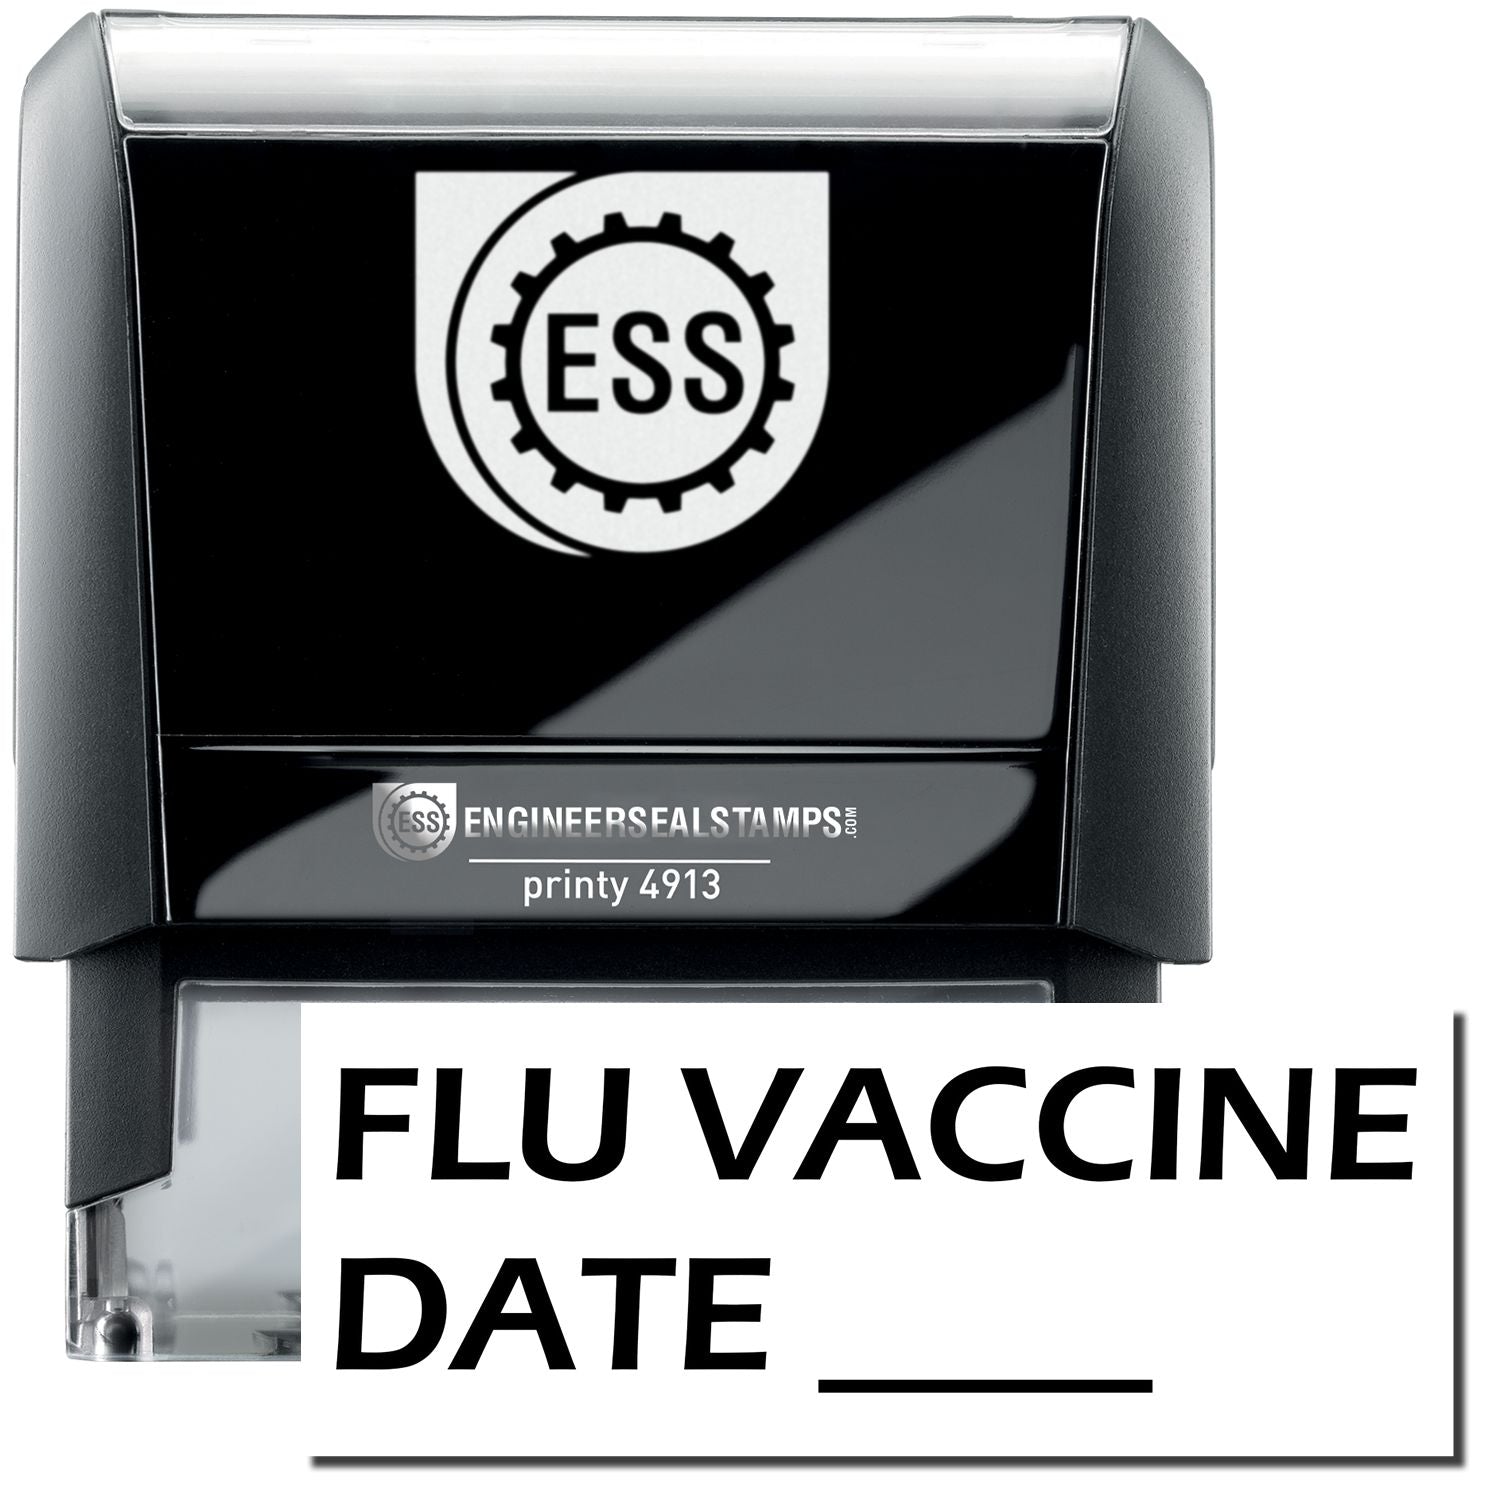 A self-inking stamp with a stamped image showing how the text "FLU VACCINE DATE" (in a large bold font) with a line (where the date can be written) is displayed by it.